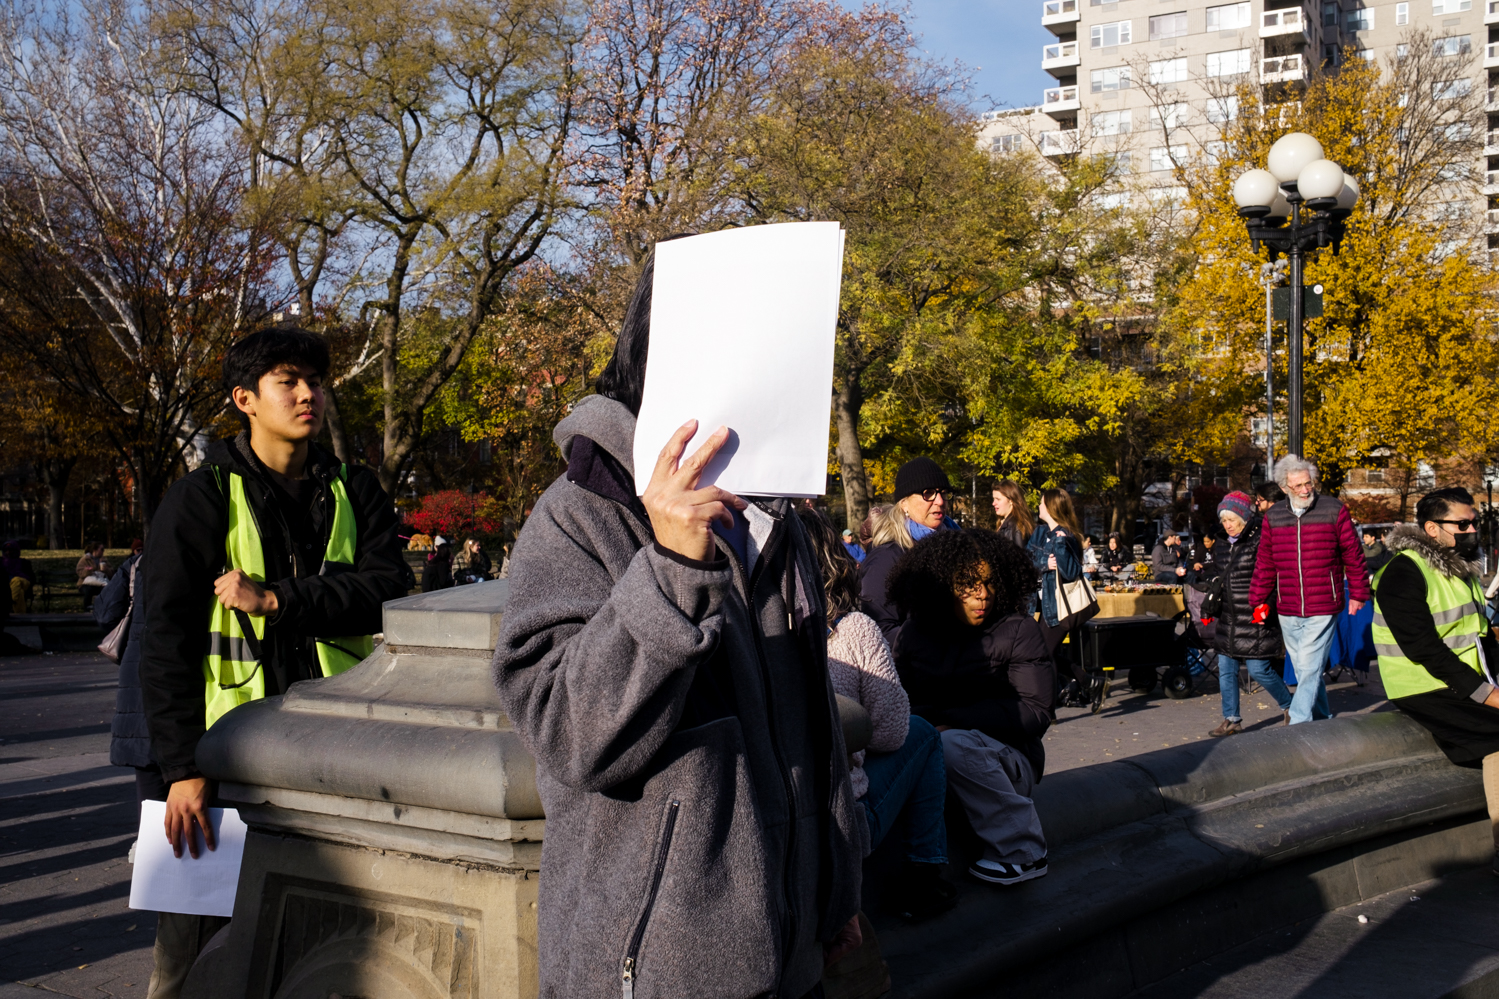 A protester covers their face with a sheet of white paper.